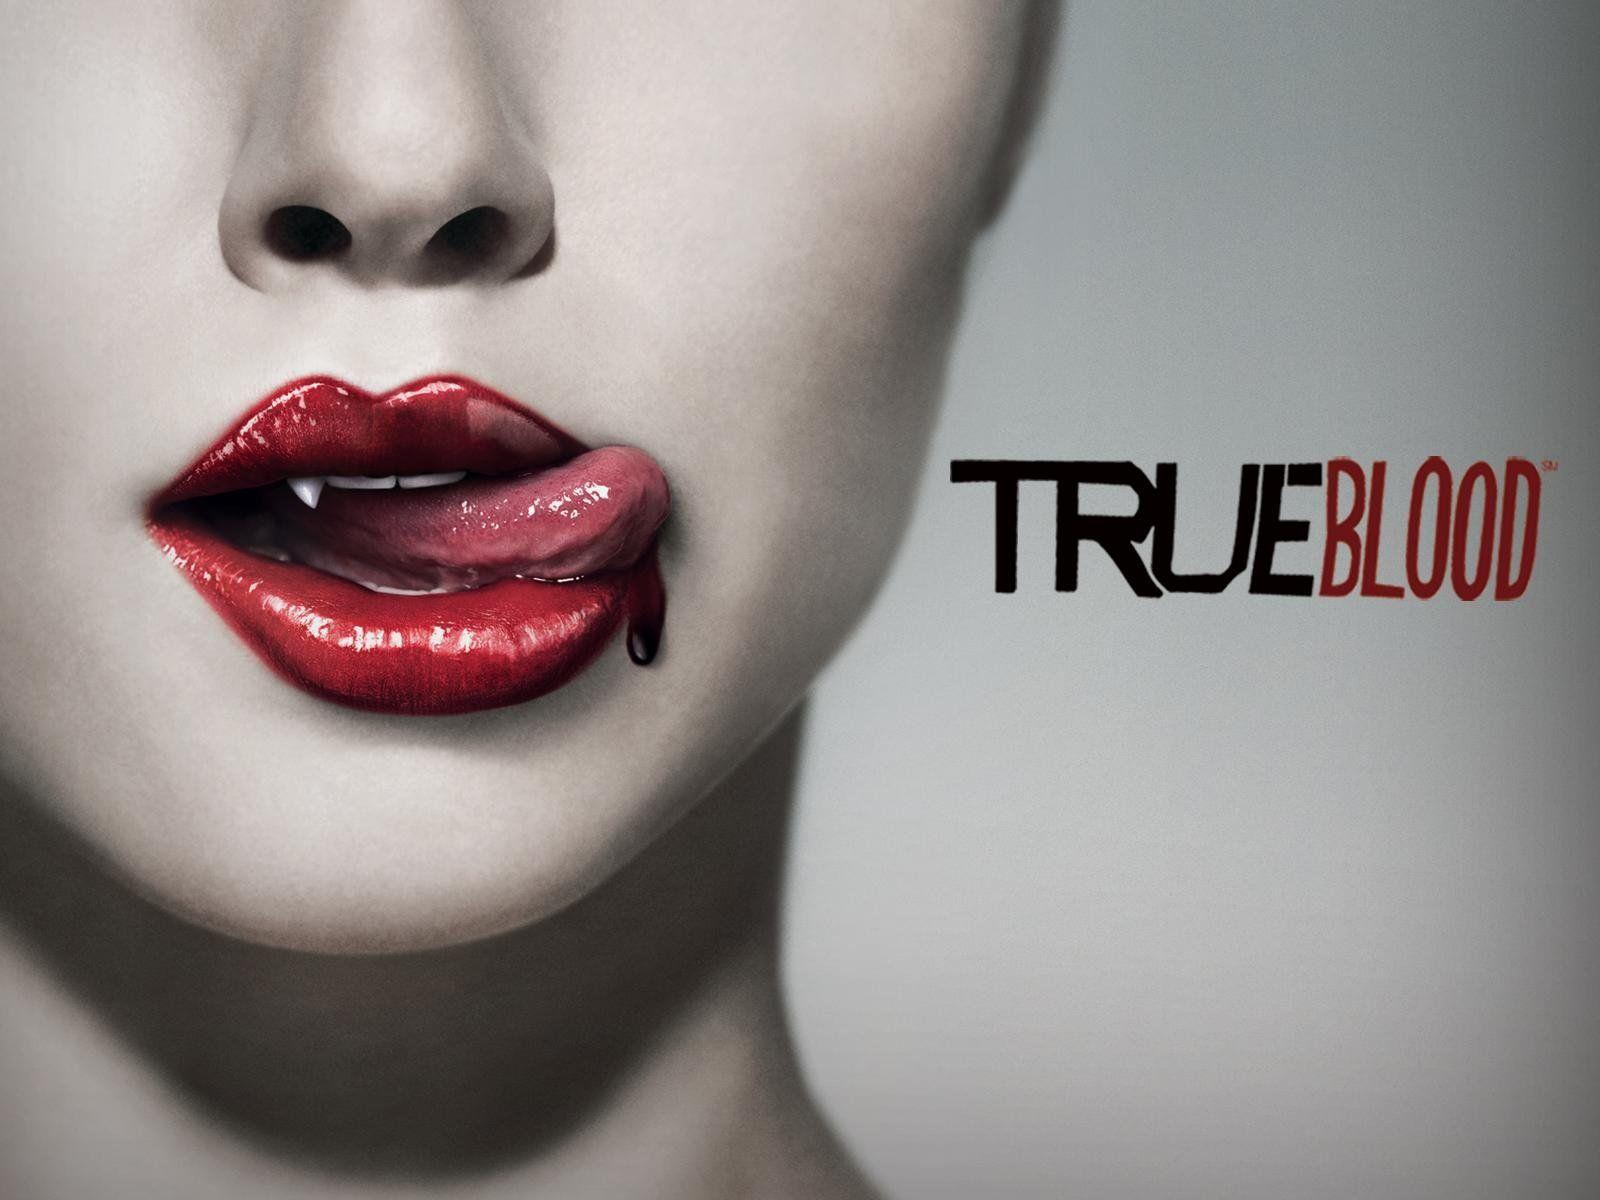 True Blood 1, Watch online now with Amazon Instant Video